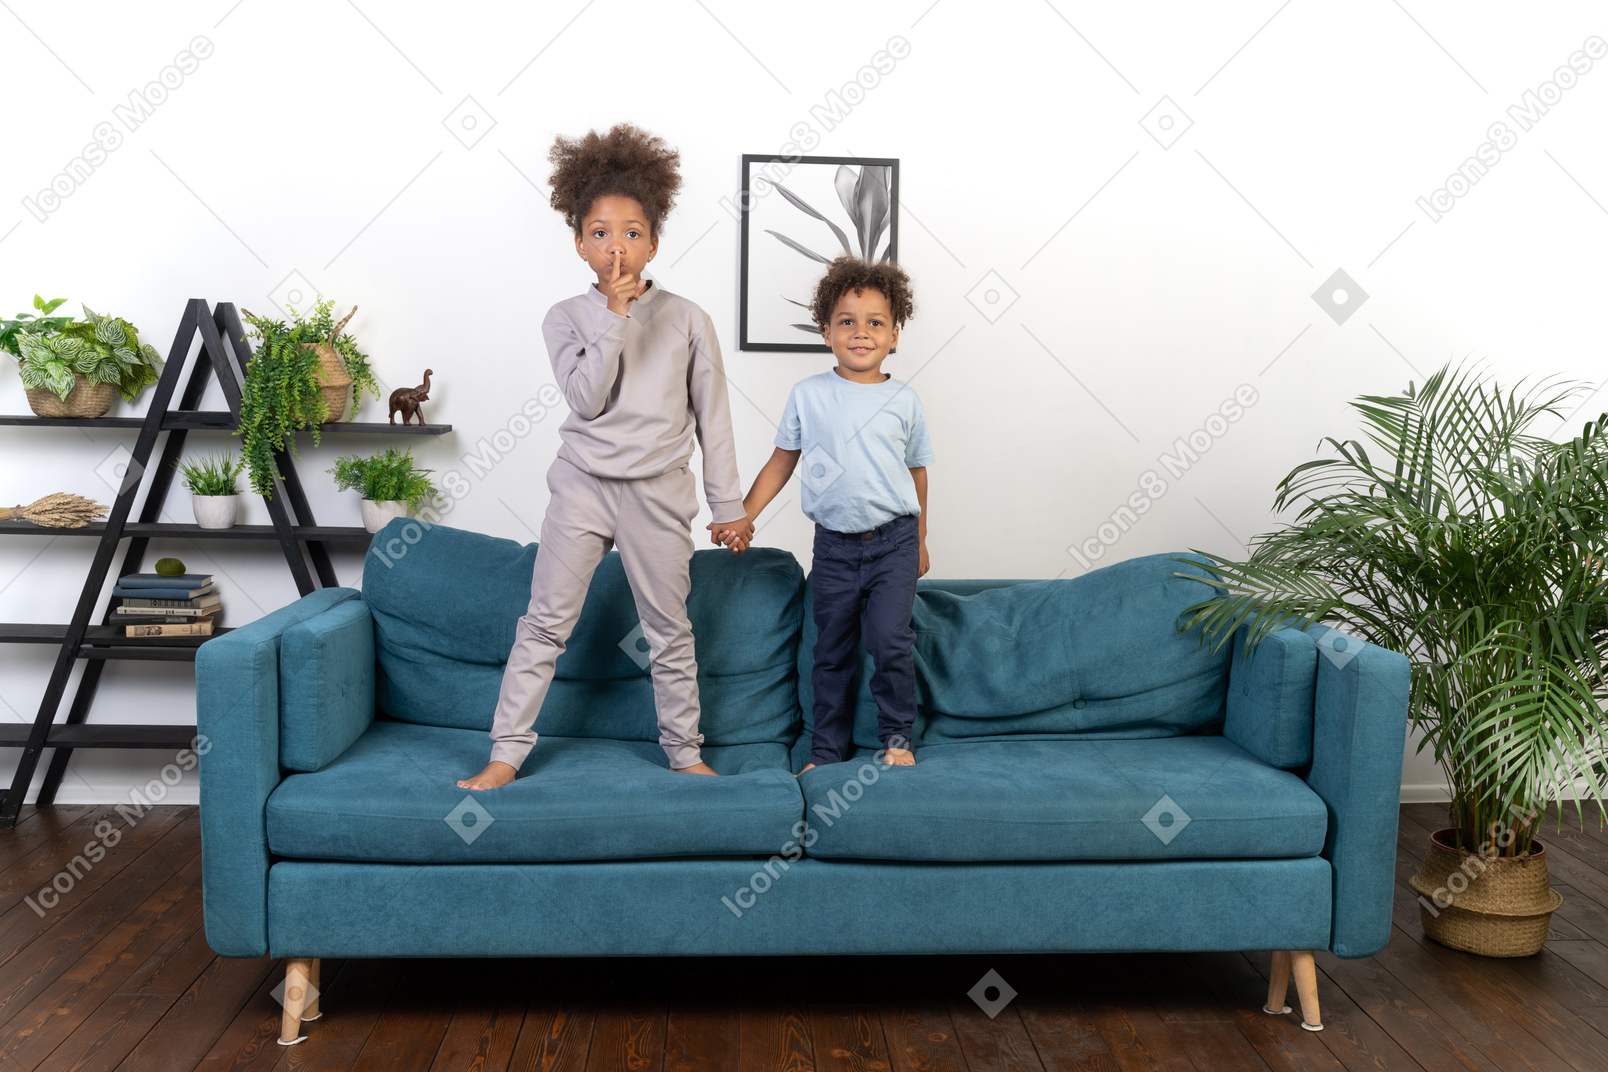 Cute boy and girl holding hands on sofa.